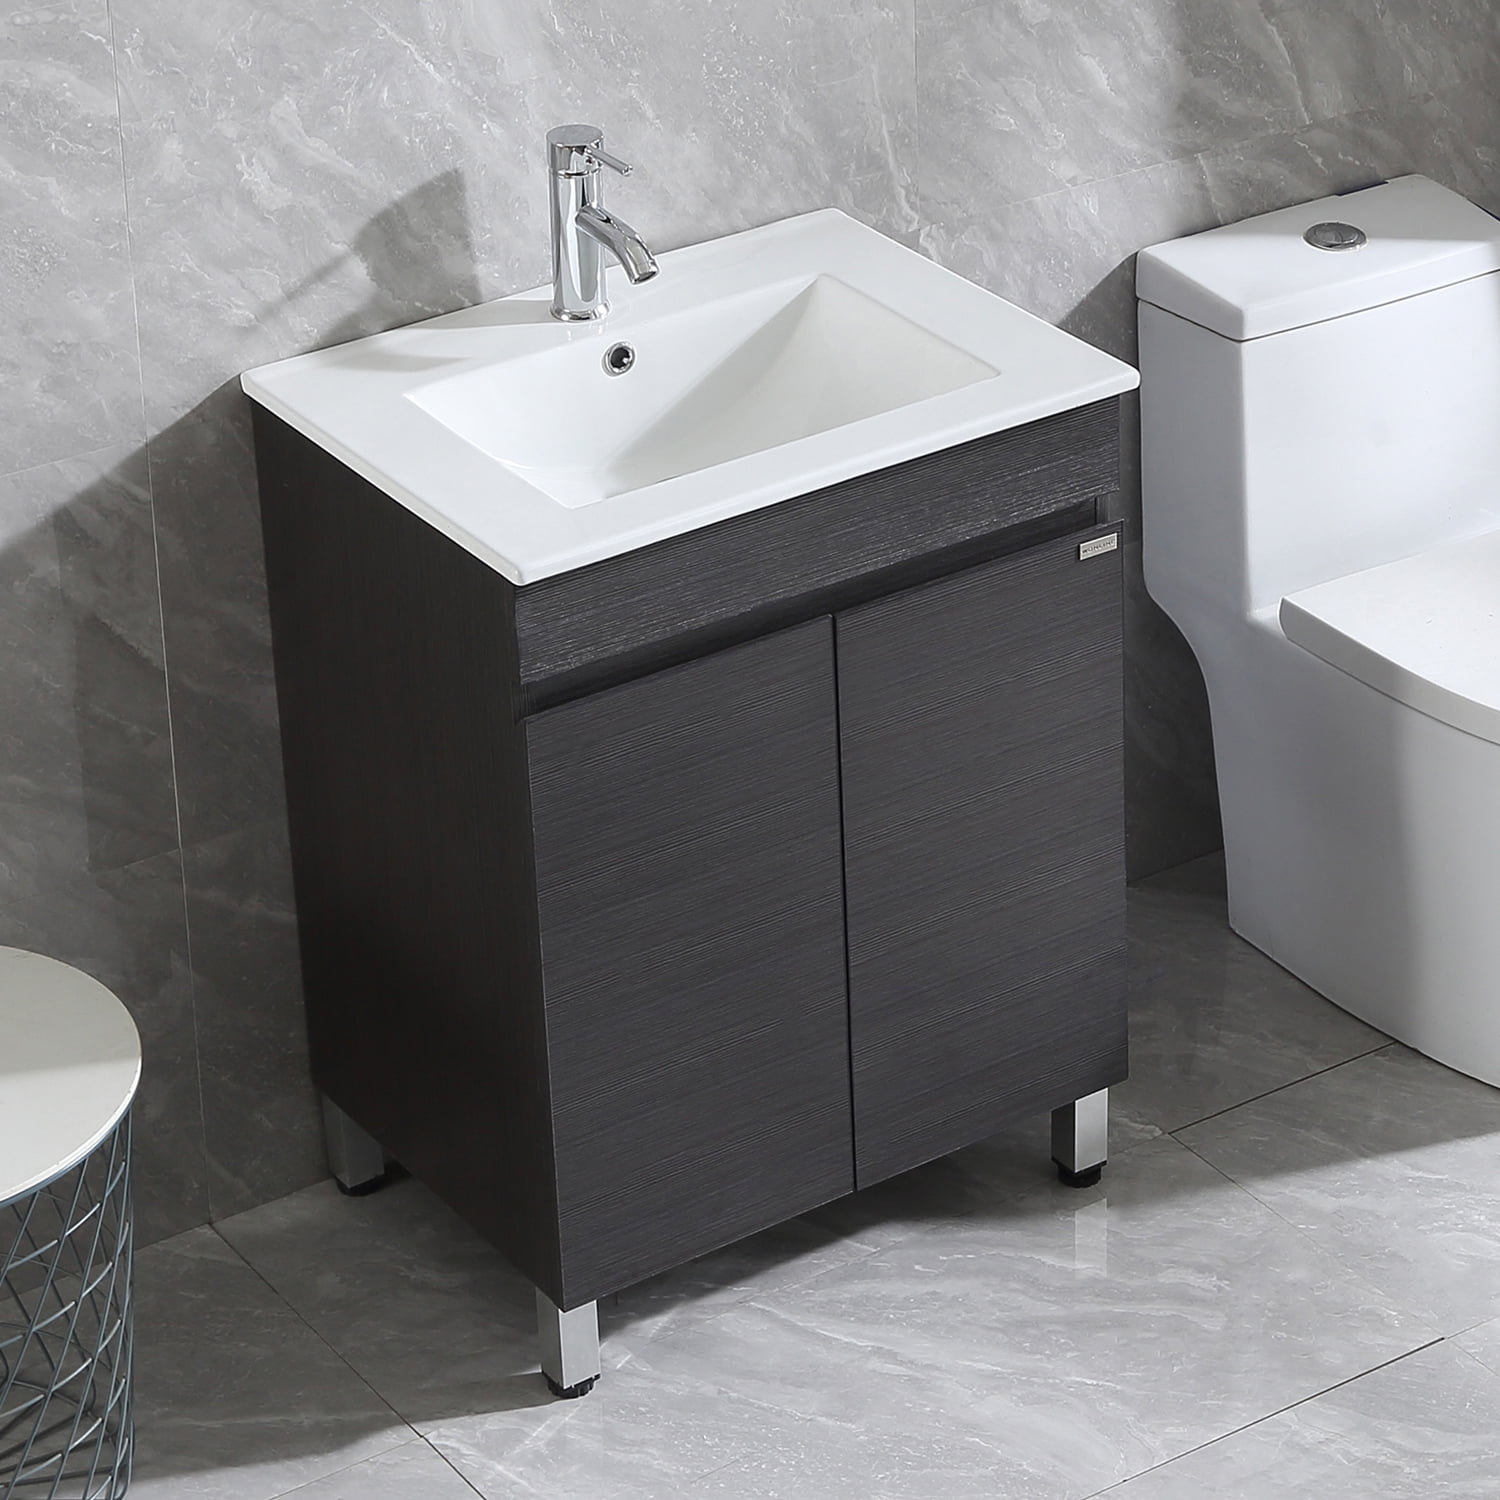 Details about   Standard 25"x19" Vitreous China Bathroom Vanity Countertop With Integral Sink  